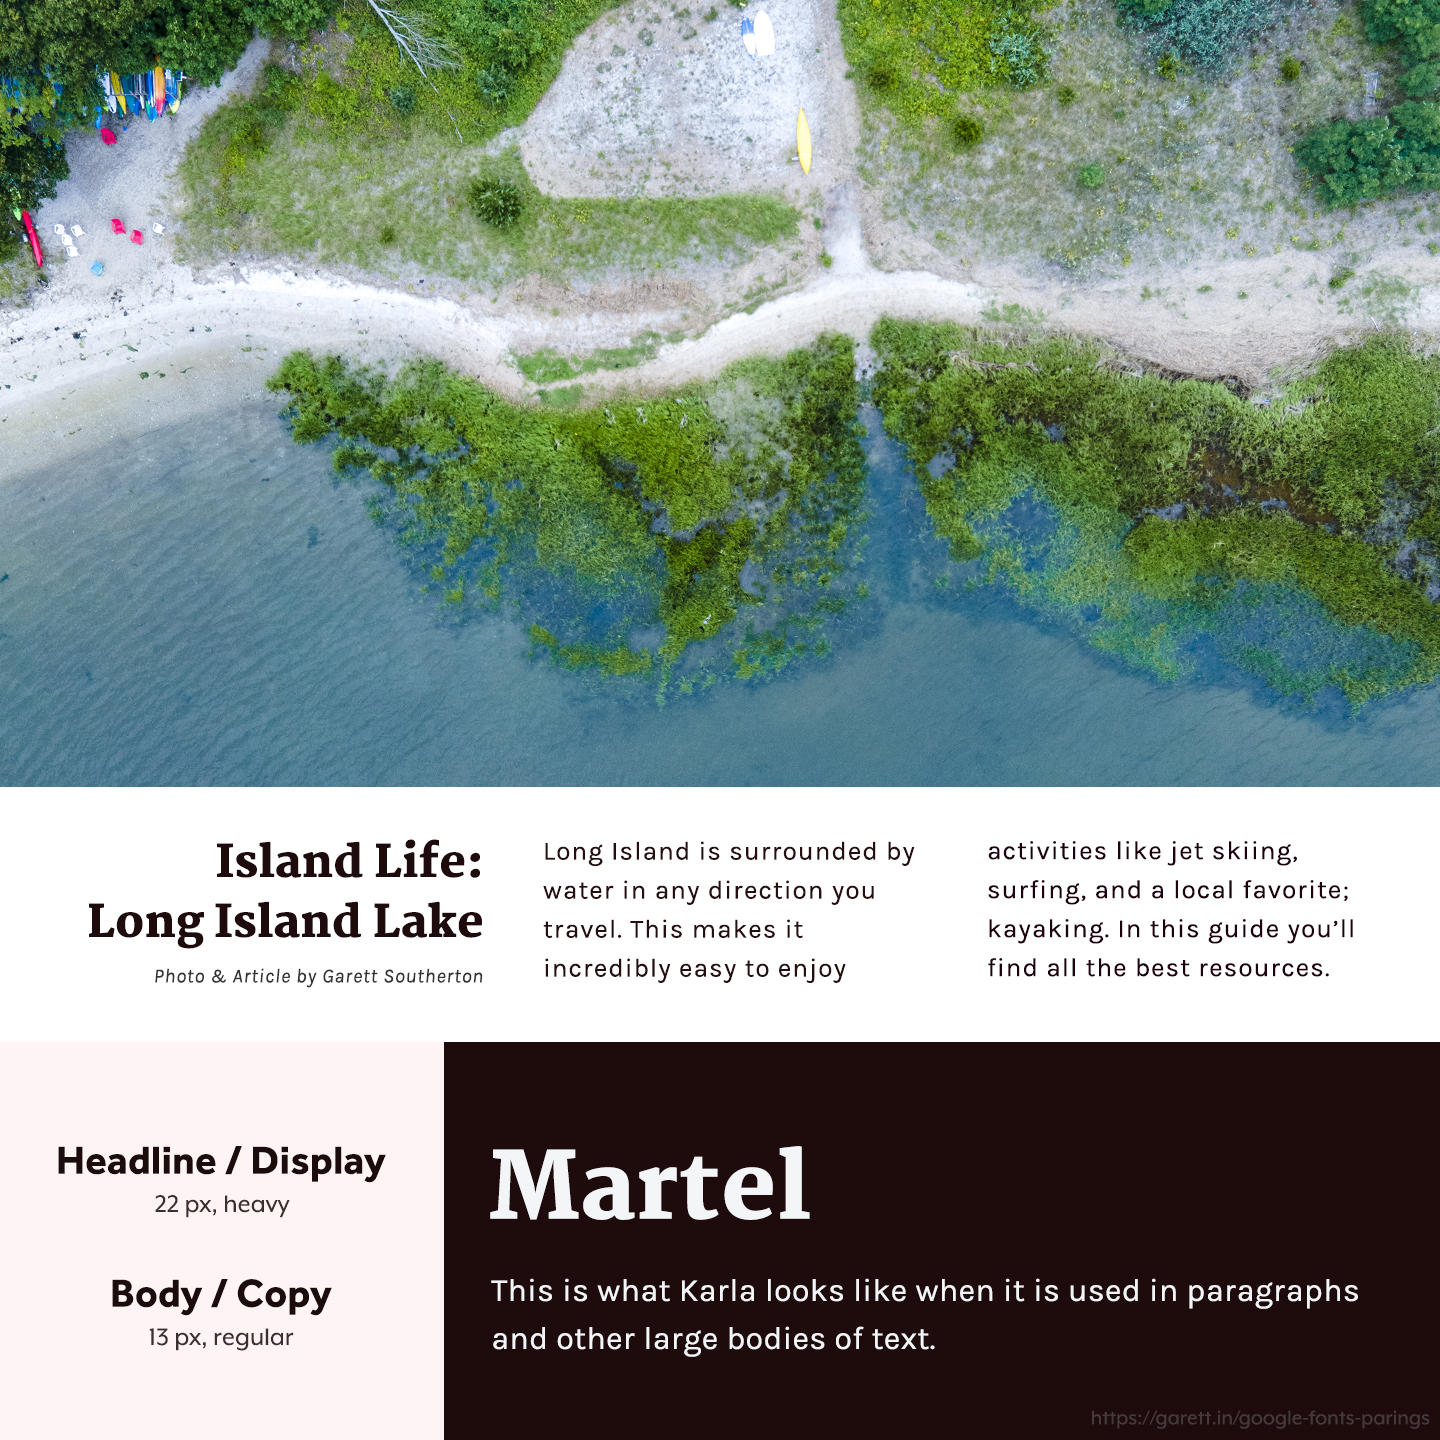 Martel and Karla font pairing - 30 Google Font Pairings for Your Brand and Website